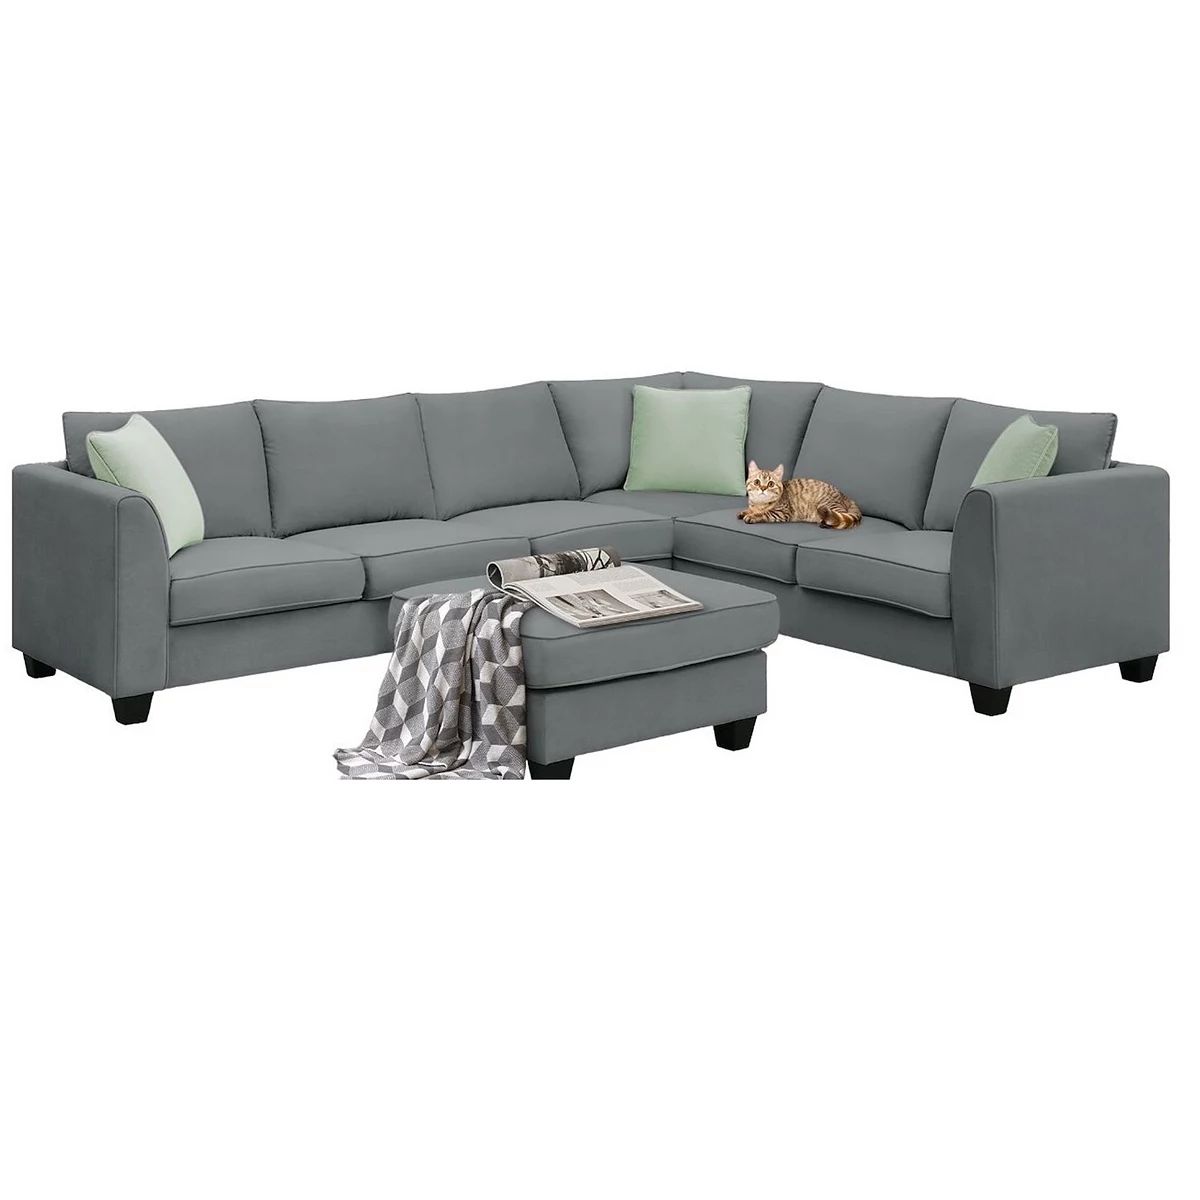 F.c Design Sectional Sofa Couches Living Room Sets 7 Seats Modular Sectional Sofa With Ottoman | Kohl's